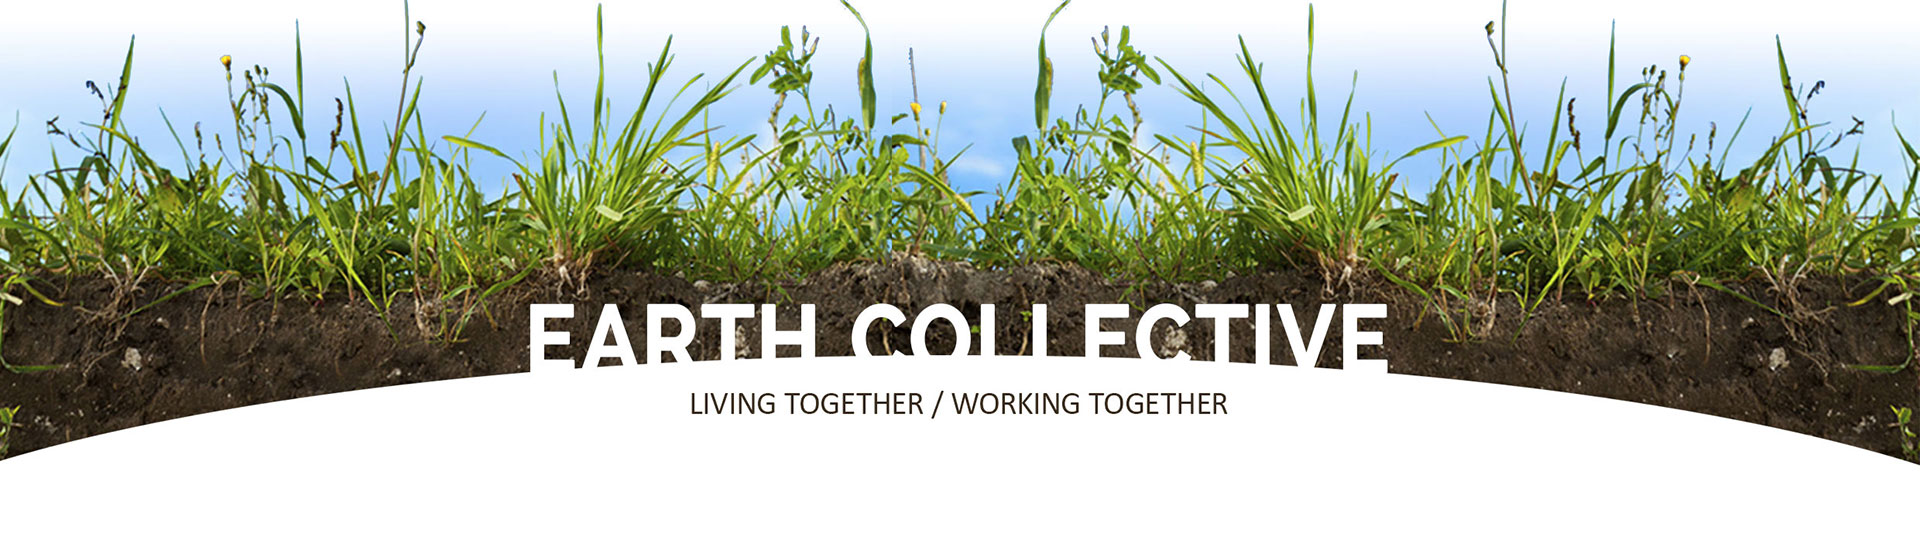 The Earth Collective - Living together, Working together